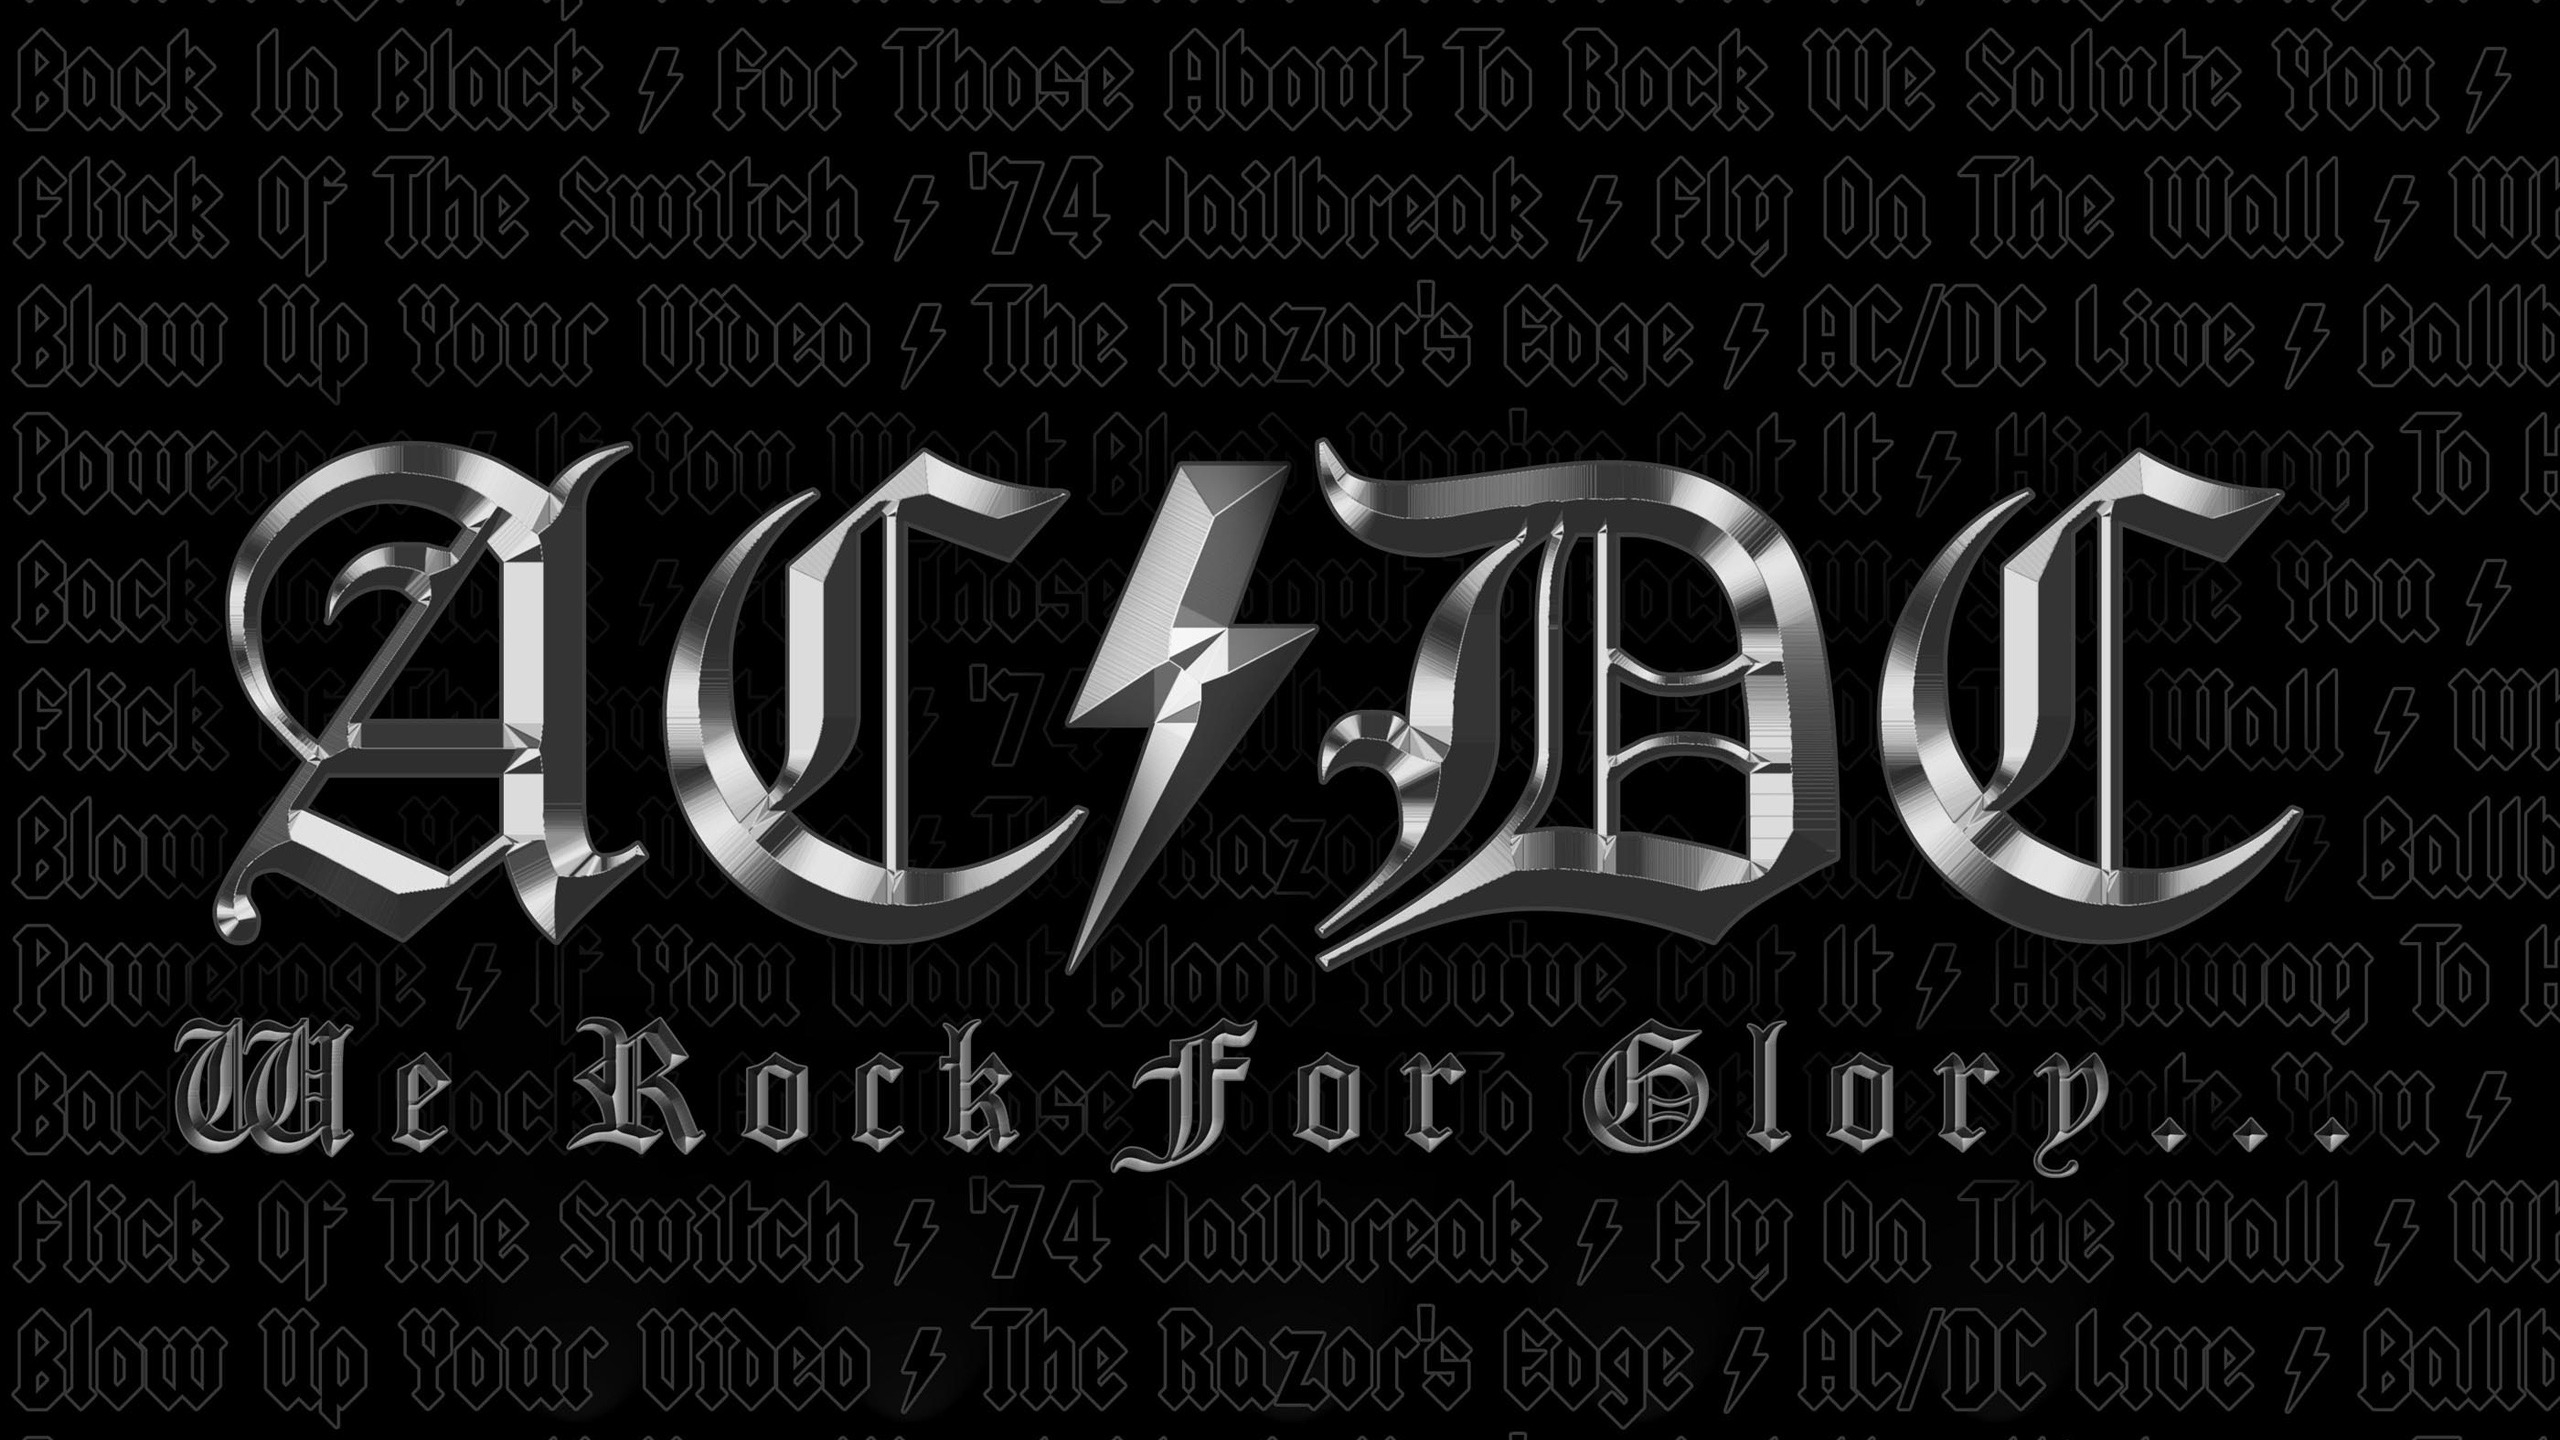 ACDC Band for 2560x1440 HDTV resolution